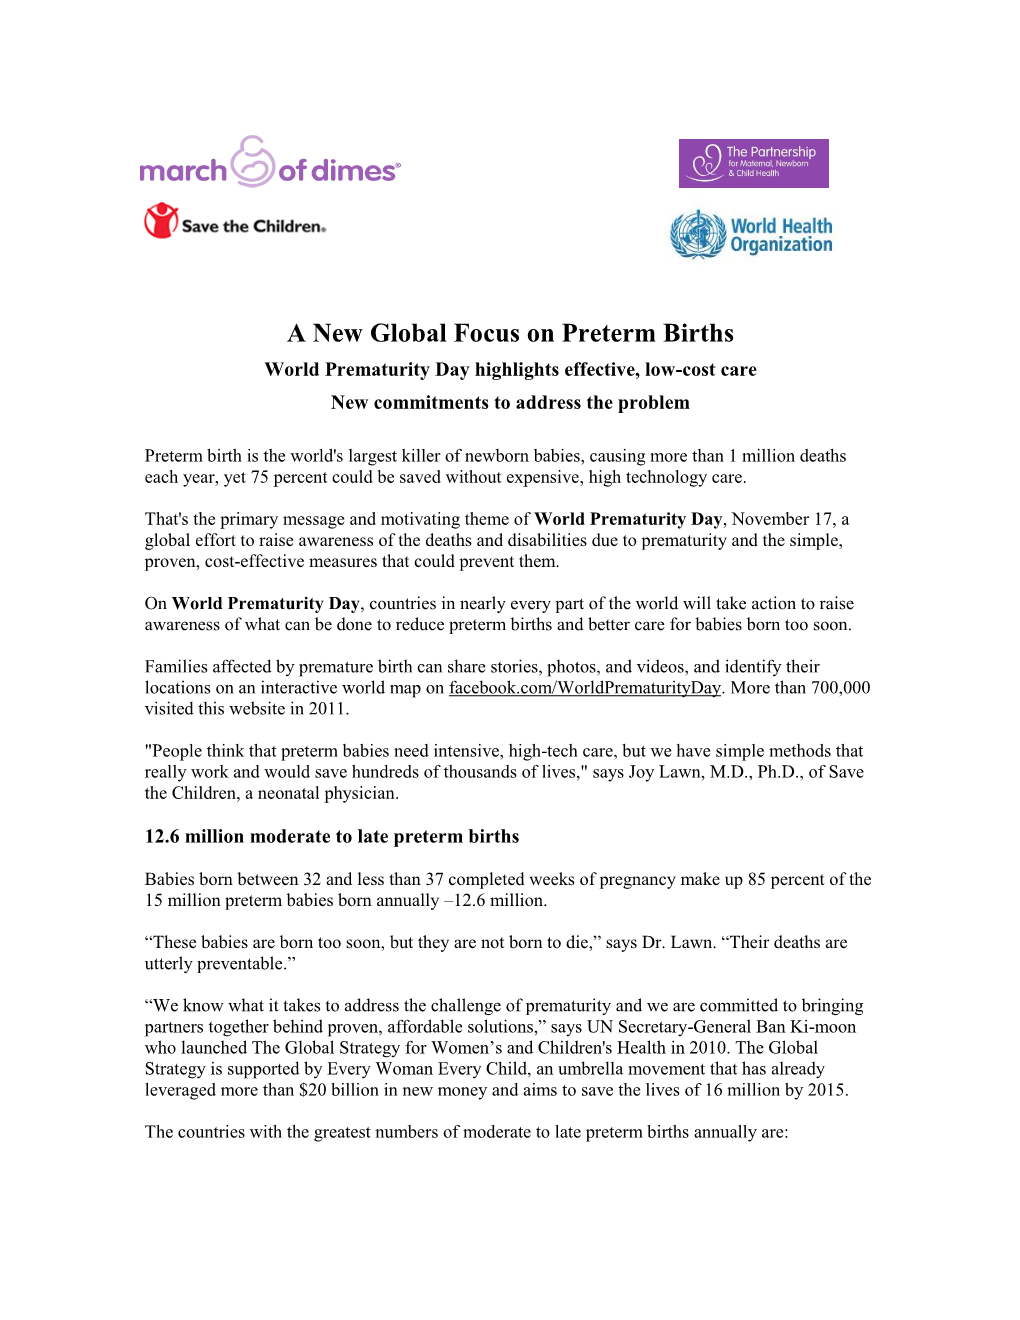 A New Global Focus on Preterm Births World Prematurity Day Highlights Effective, Low-Cost Care New Commitments to Address the Problem